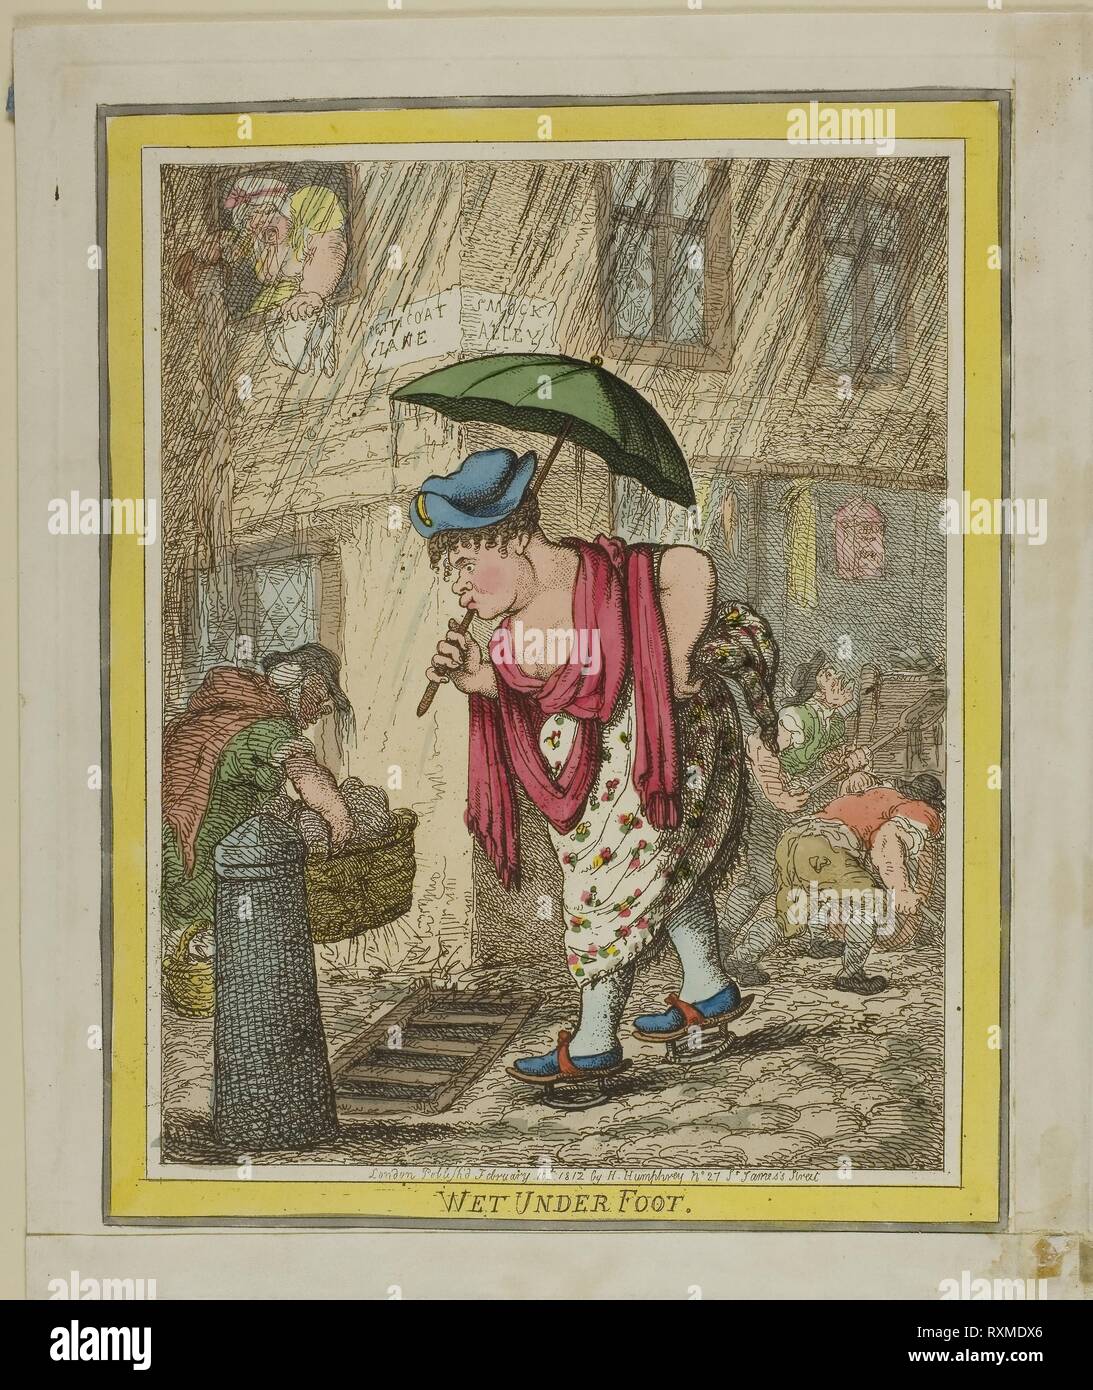 Wet Under Foot. Thomas Rowlandson (English, 1756-1827); published by Hannah Humphrey (English, 1745-1818) and Thomas Tegg (English, 1776-1845). Date: 1812. Dimensions: 255 x 200 mm. Hand-colored etching on ivory wove paper. Origin: England. Museum: The Chicago Art Institute. Stock Photo